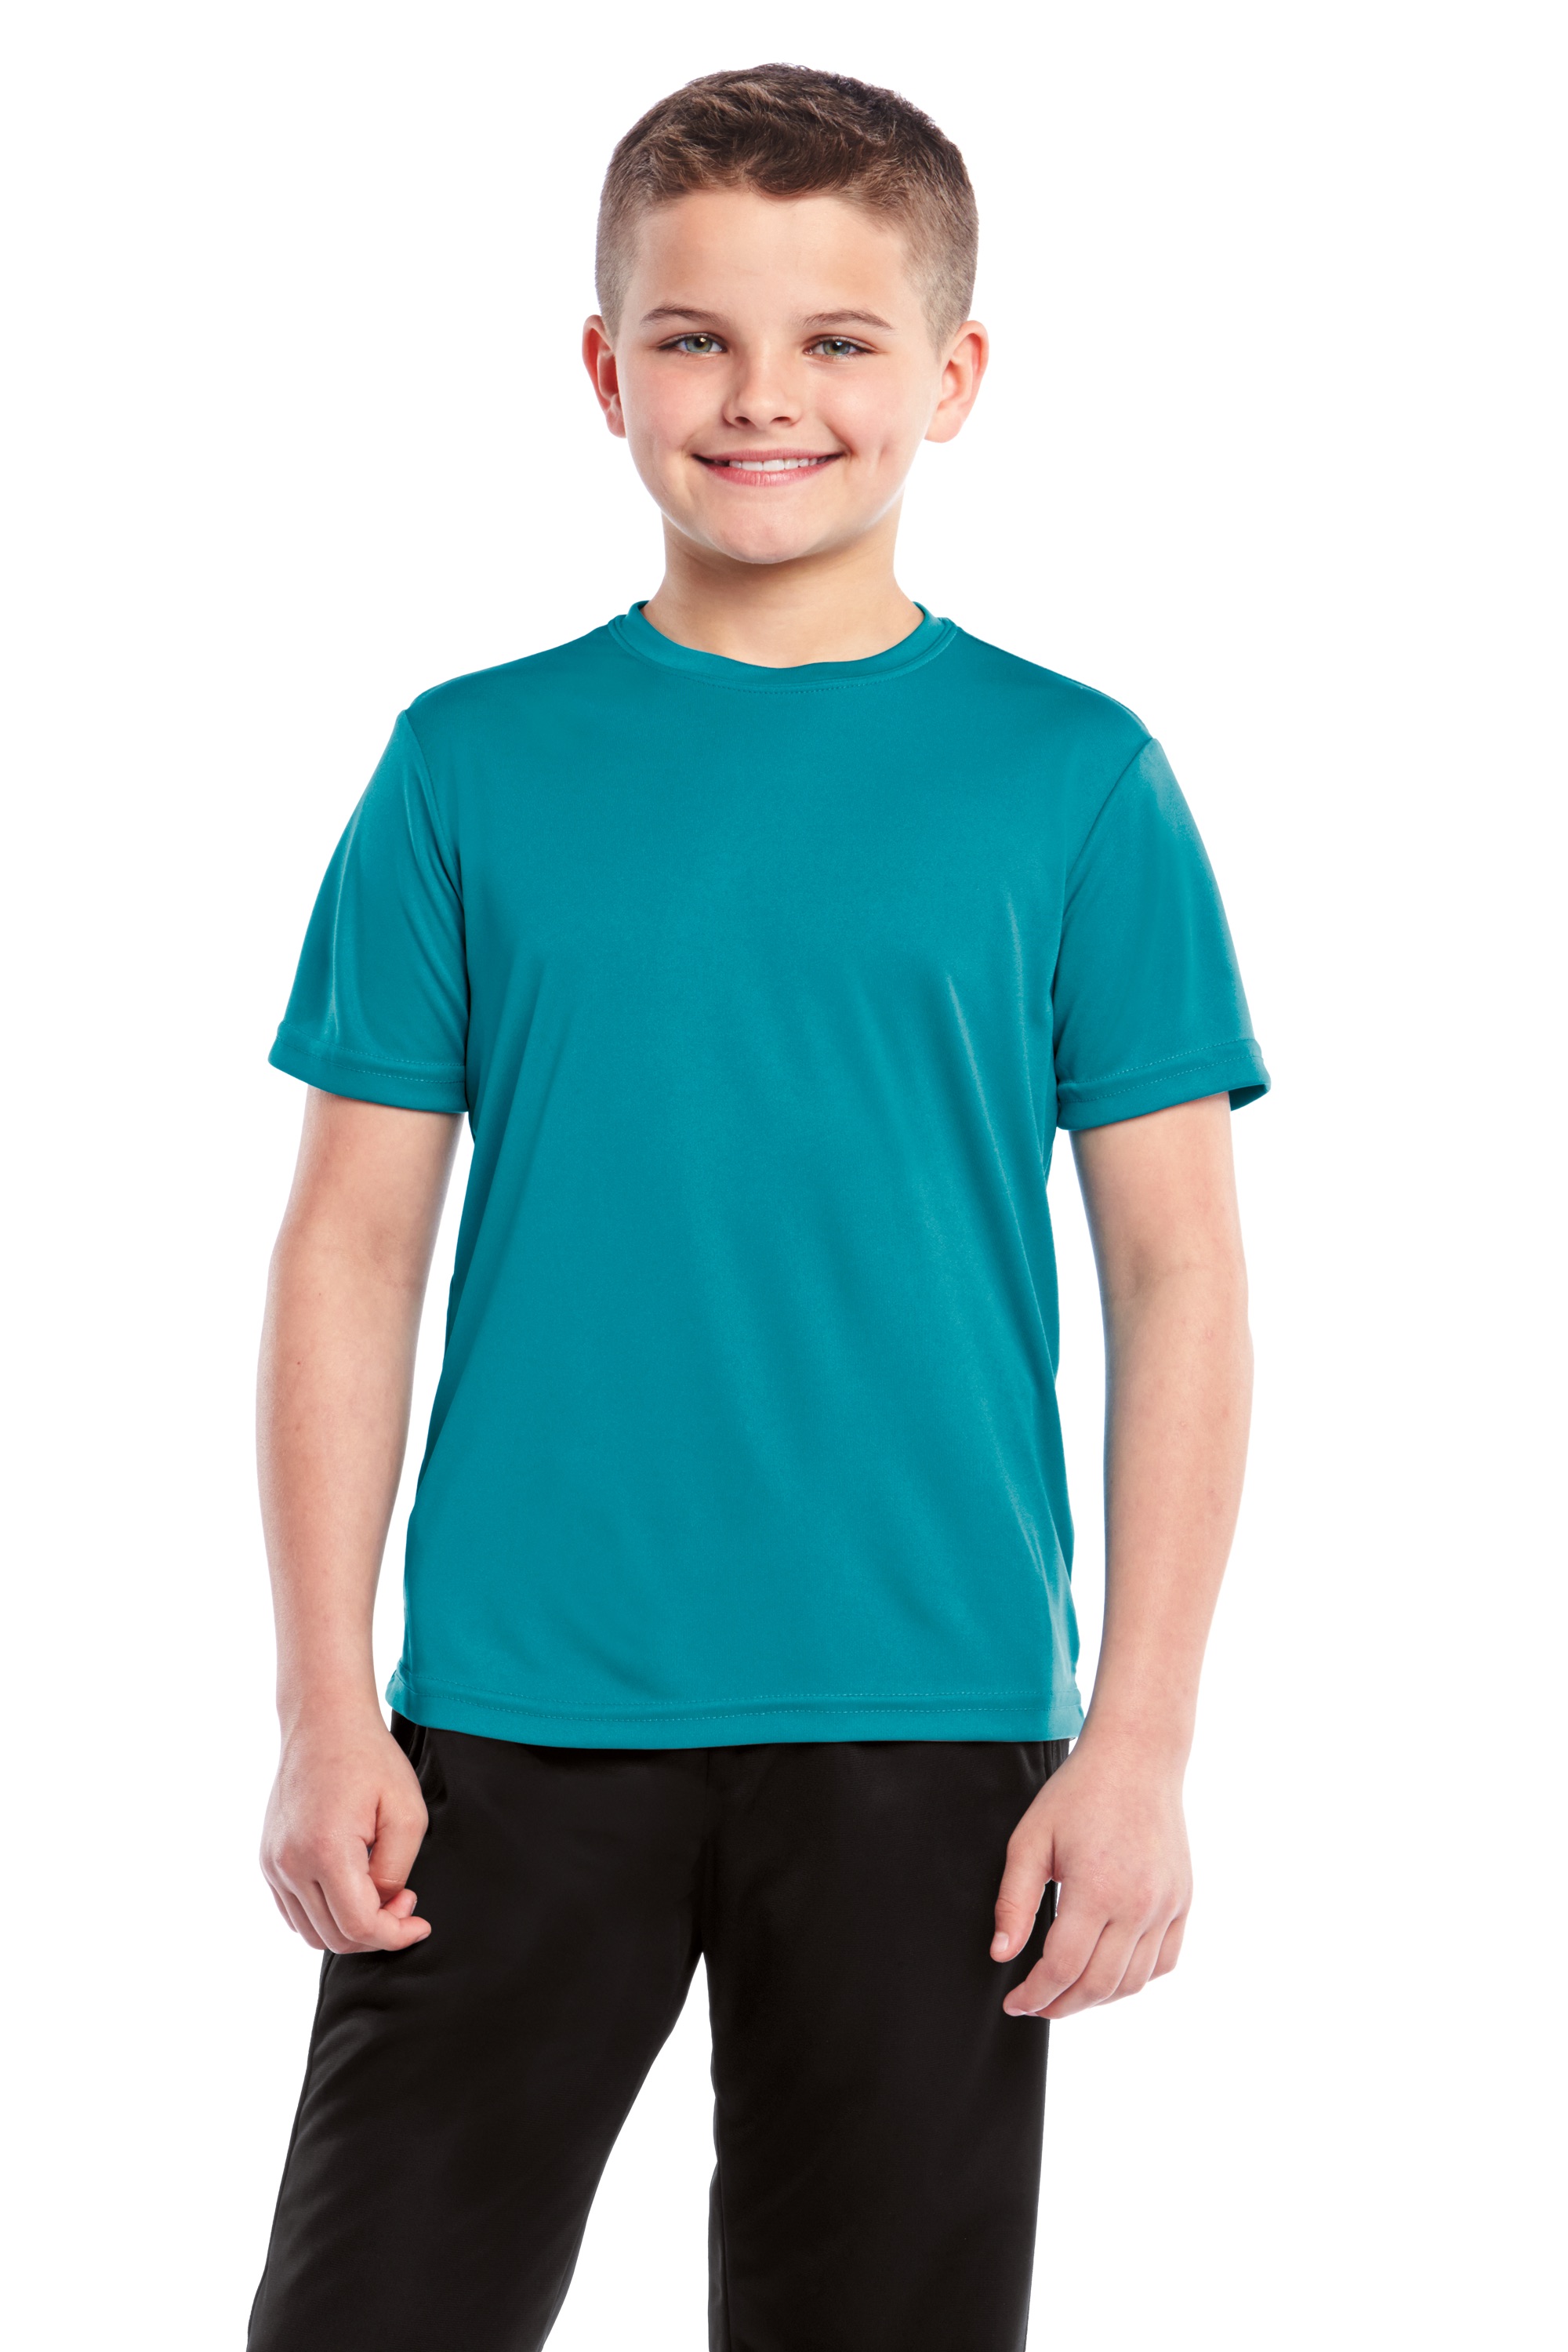 Sport-Tek Youth PosiCharge Competitor Tee YST350 - Model Image